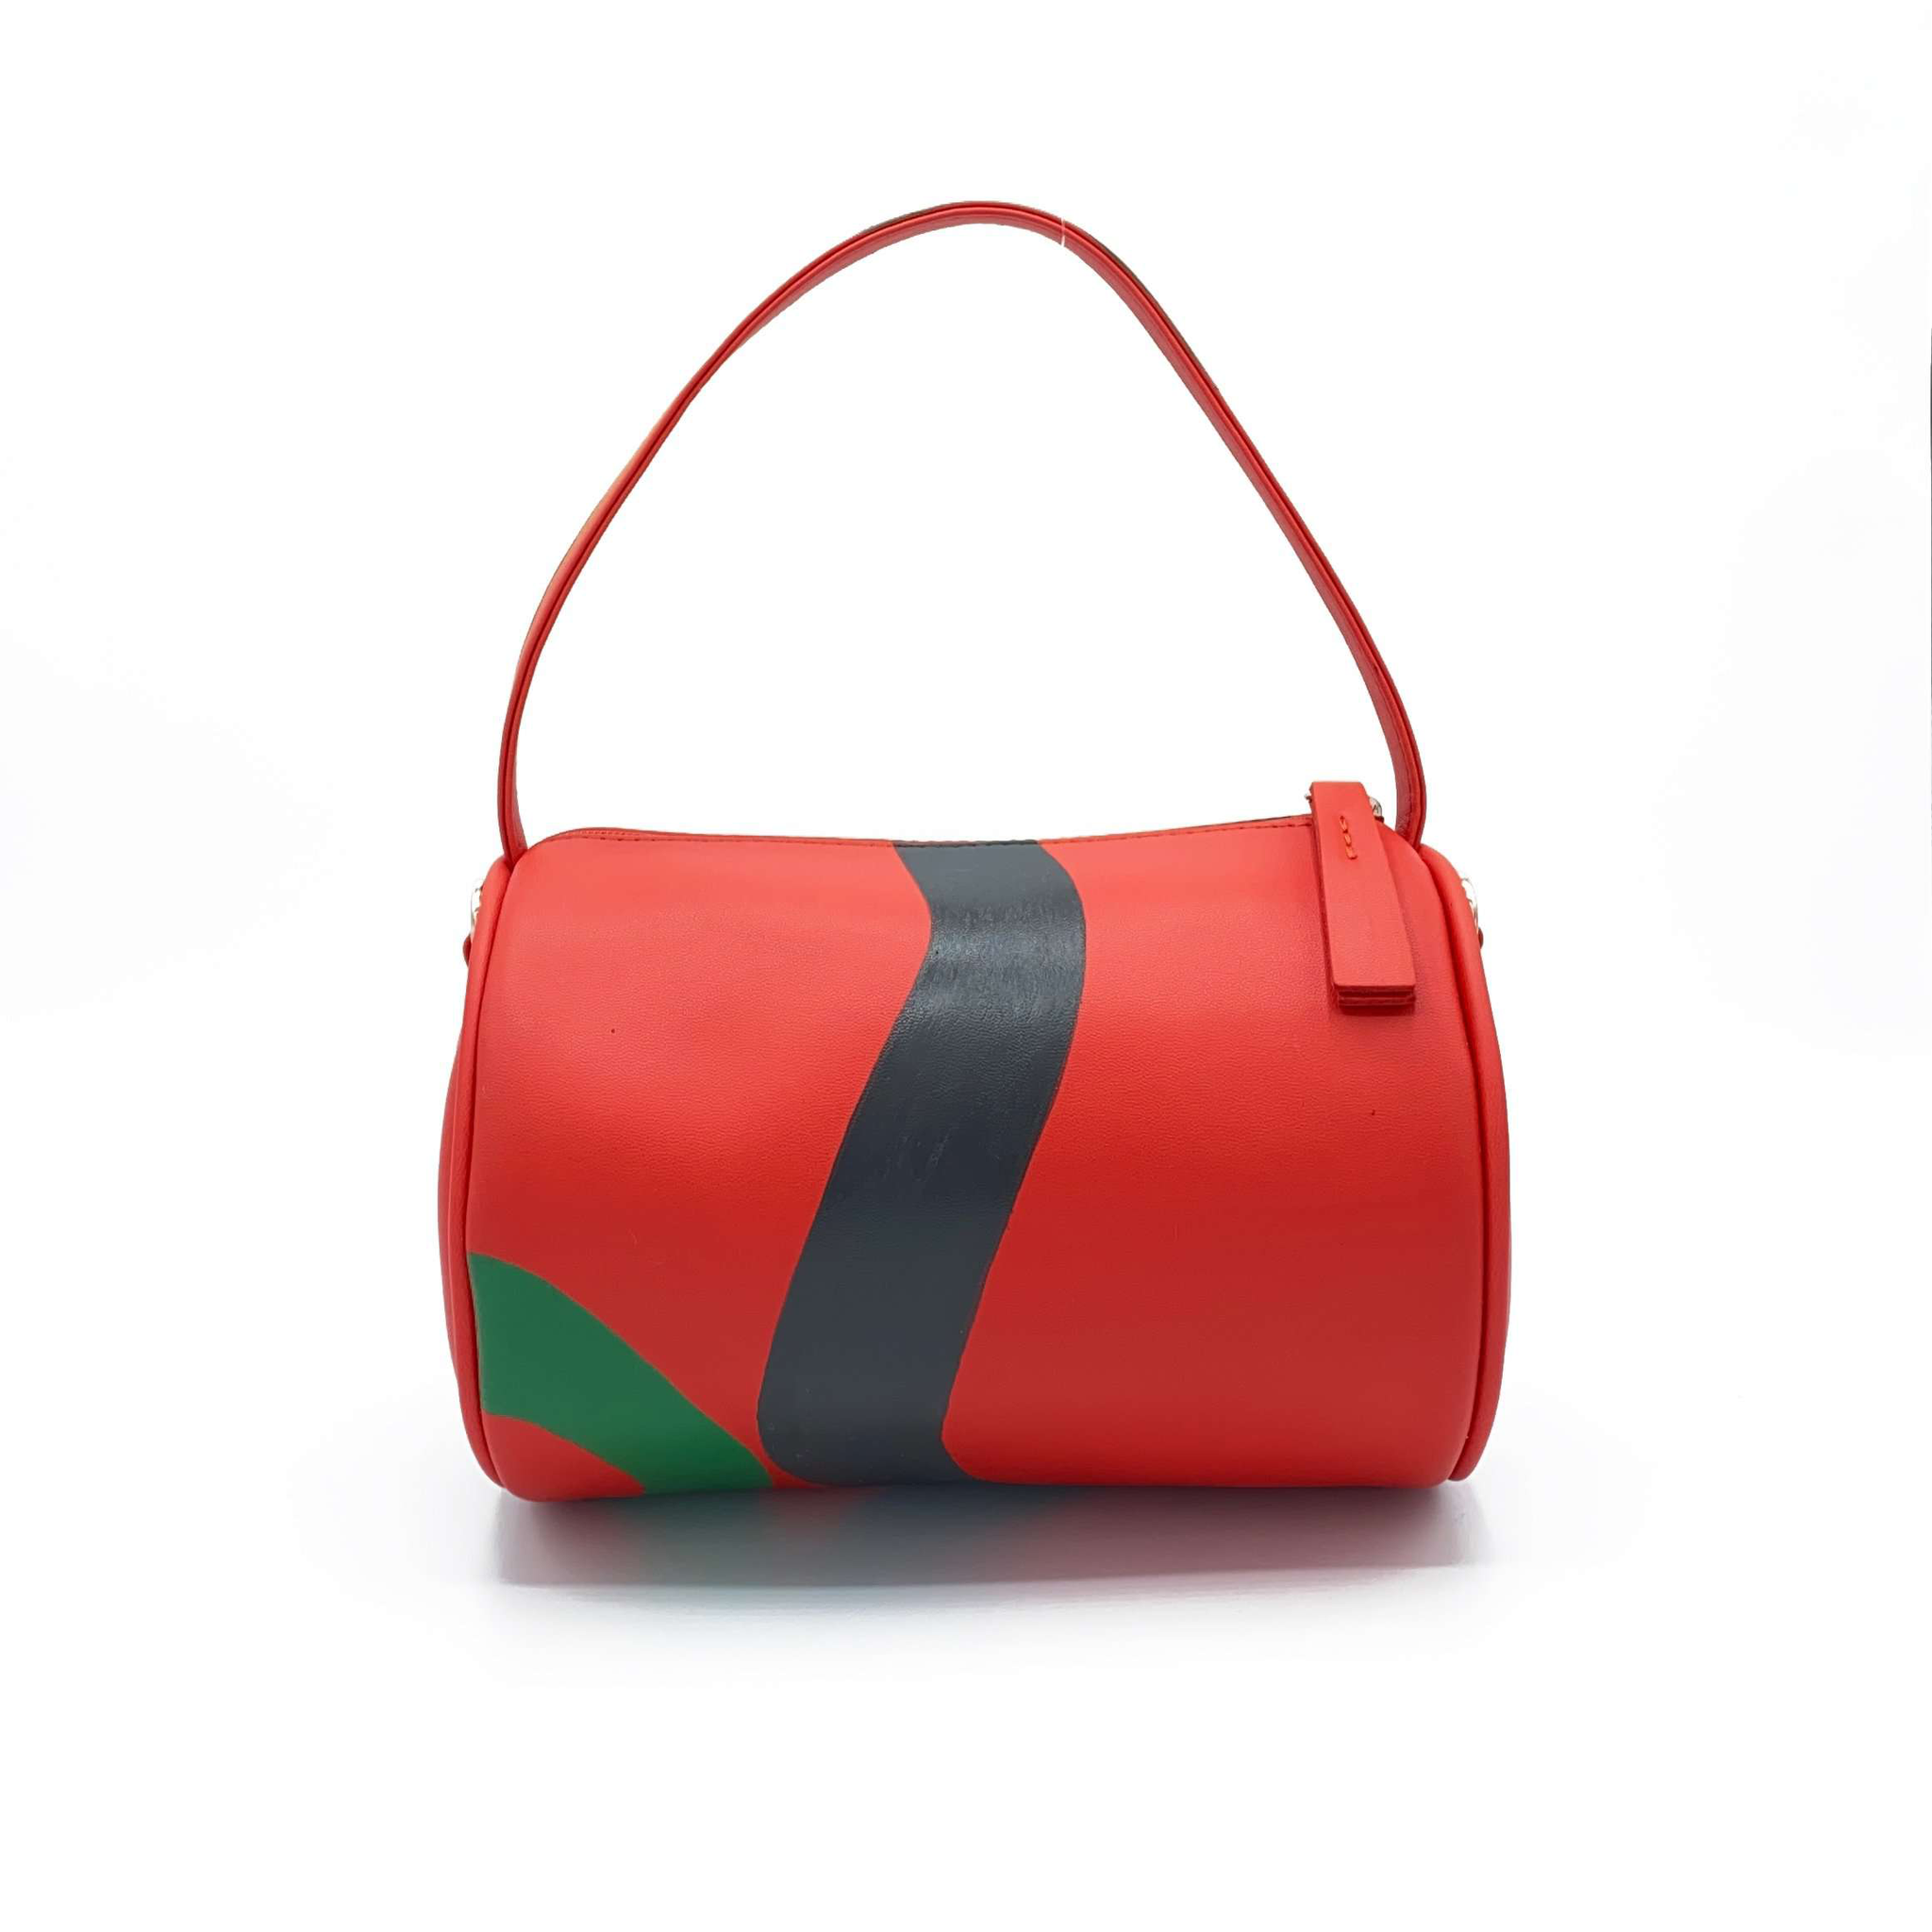 Vegan leather duffle style mini bag with detachable crossbody strap in red with hand painted squiggles in black and green.   Side A.